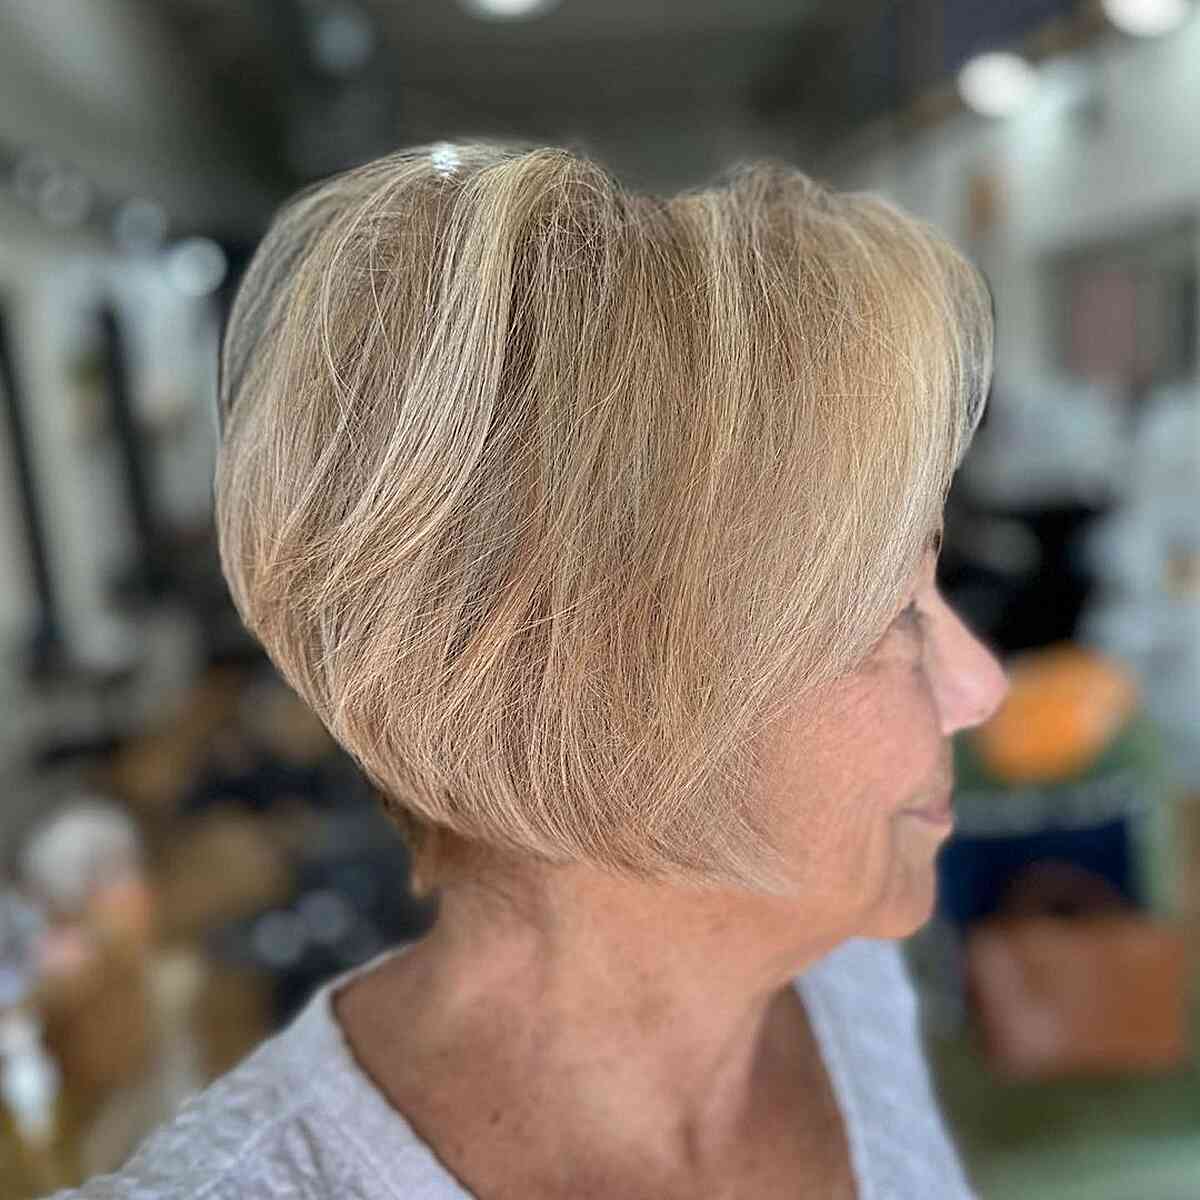 Jaw-Length Dimensional Stacked Bob with Tapered Nape for Older Women Aged 60 and Up